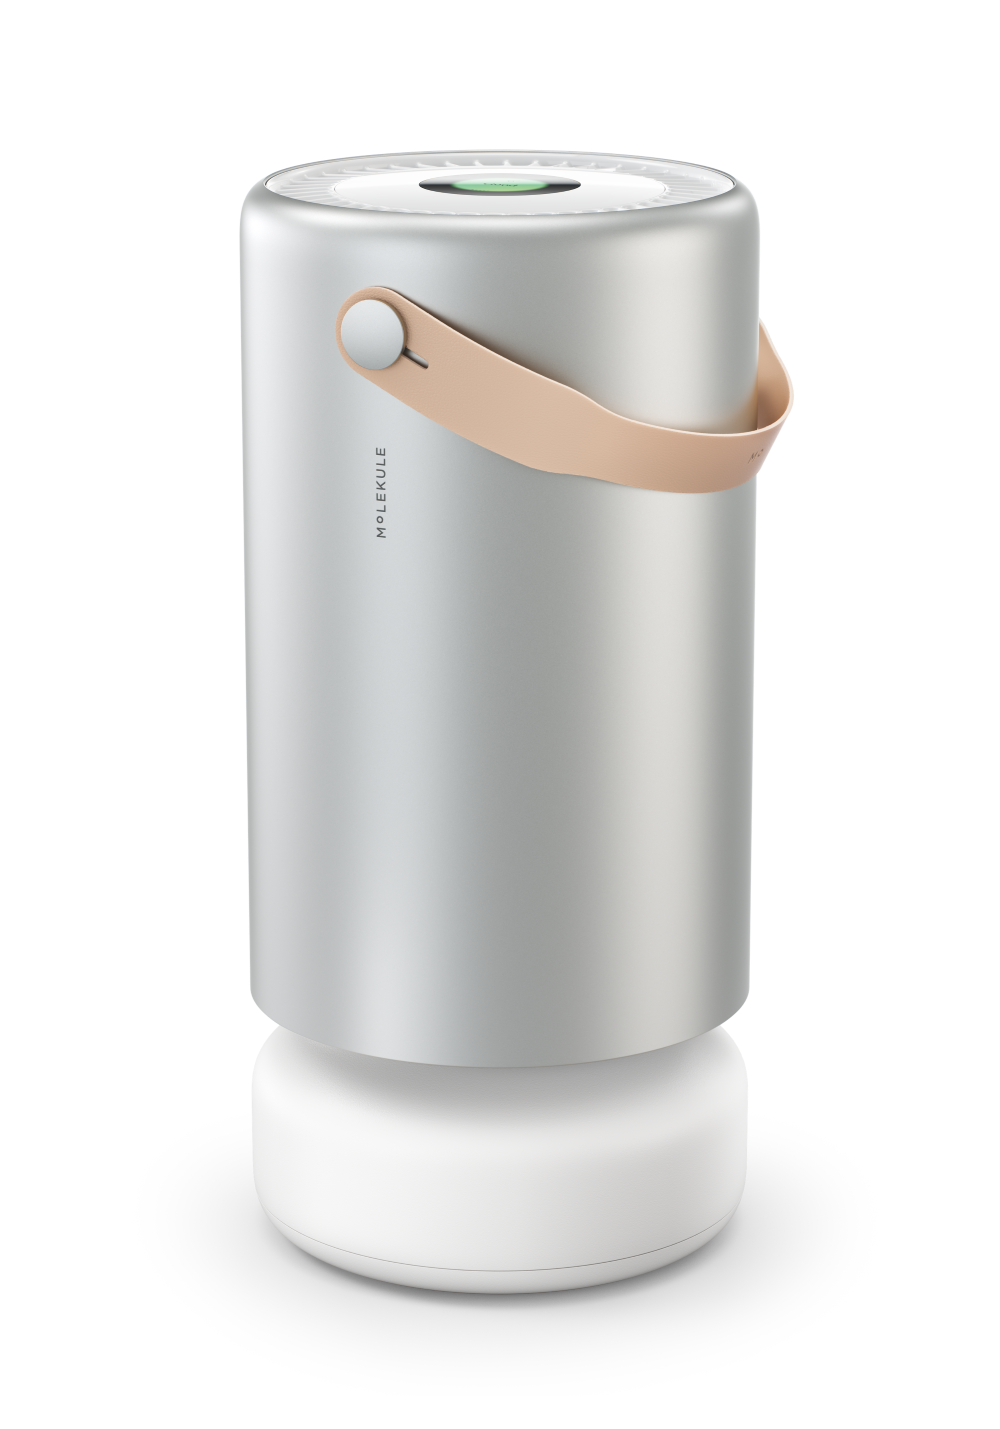 Molekule Air Pro air purifier on white background